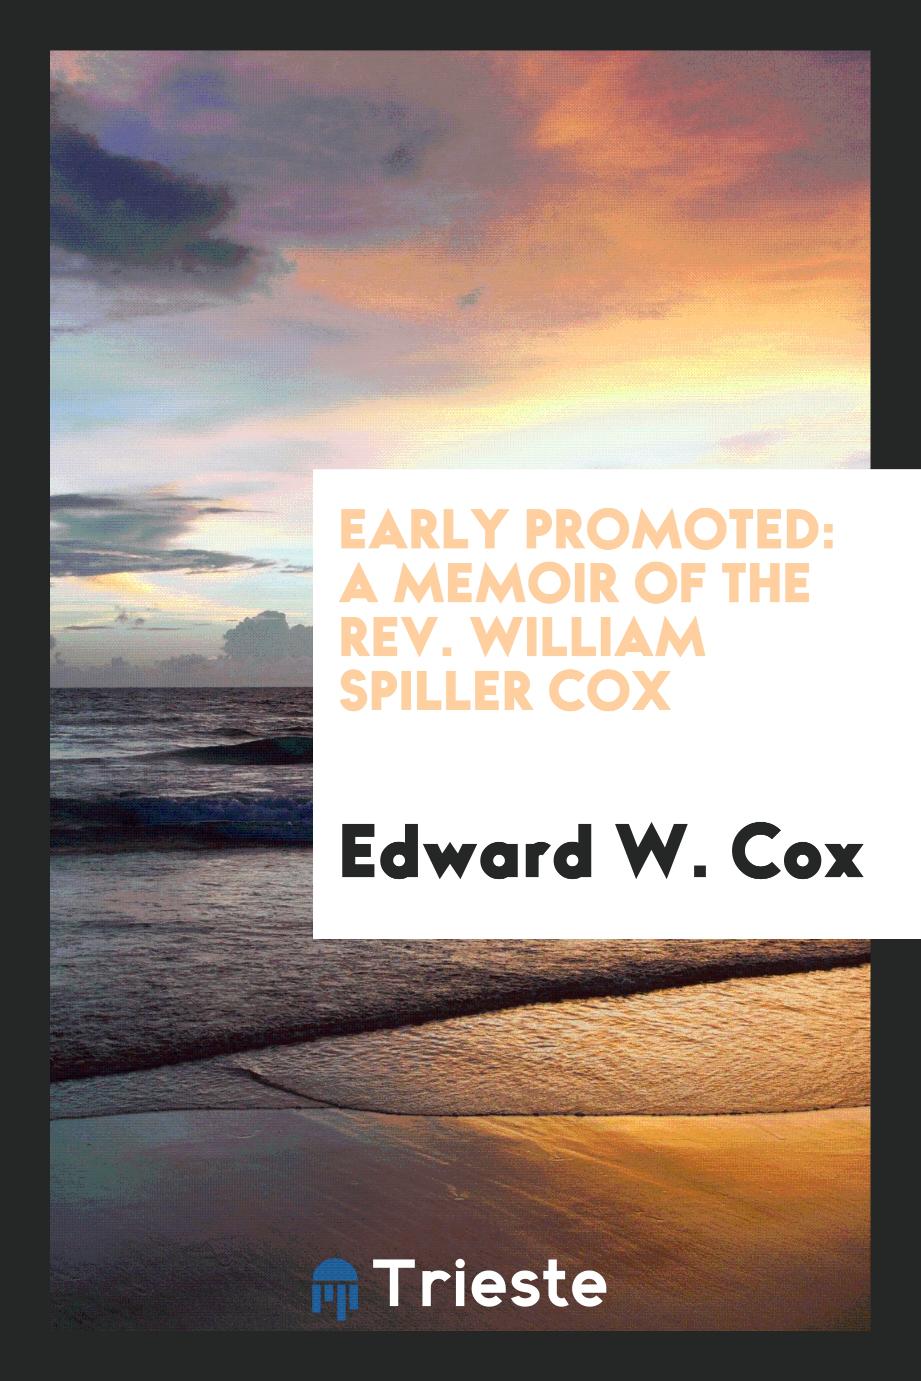 Early promoted: a memoir of the Rev. William Spiller Cox